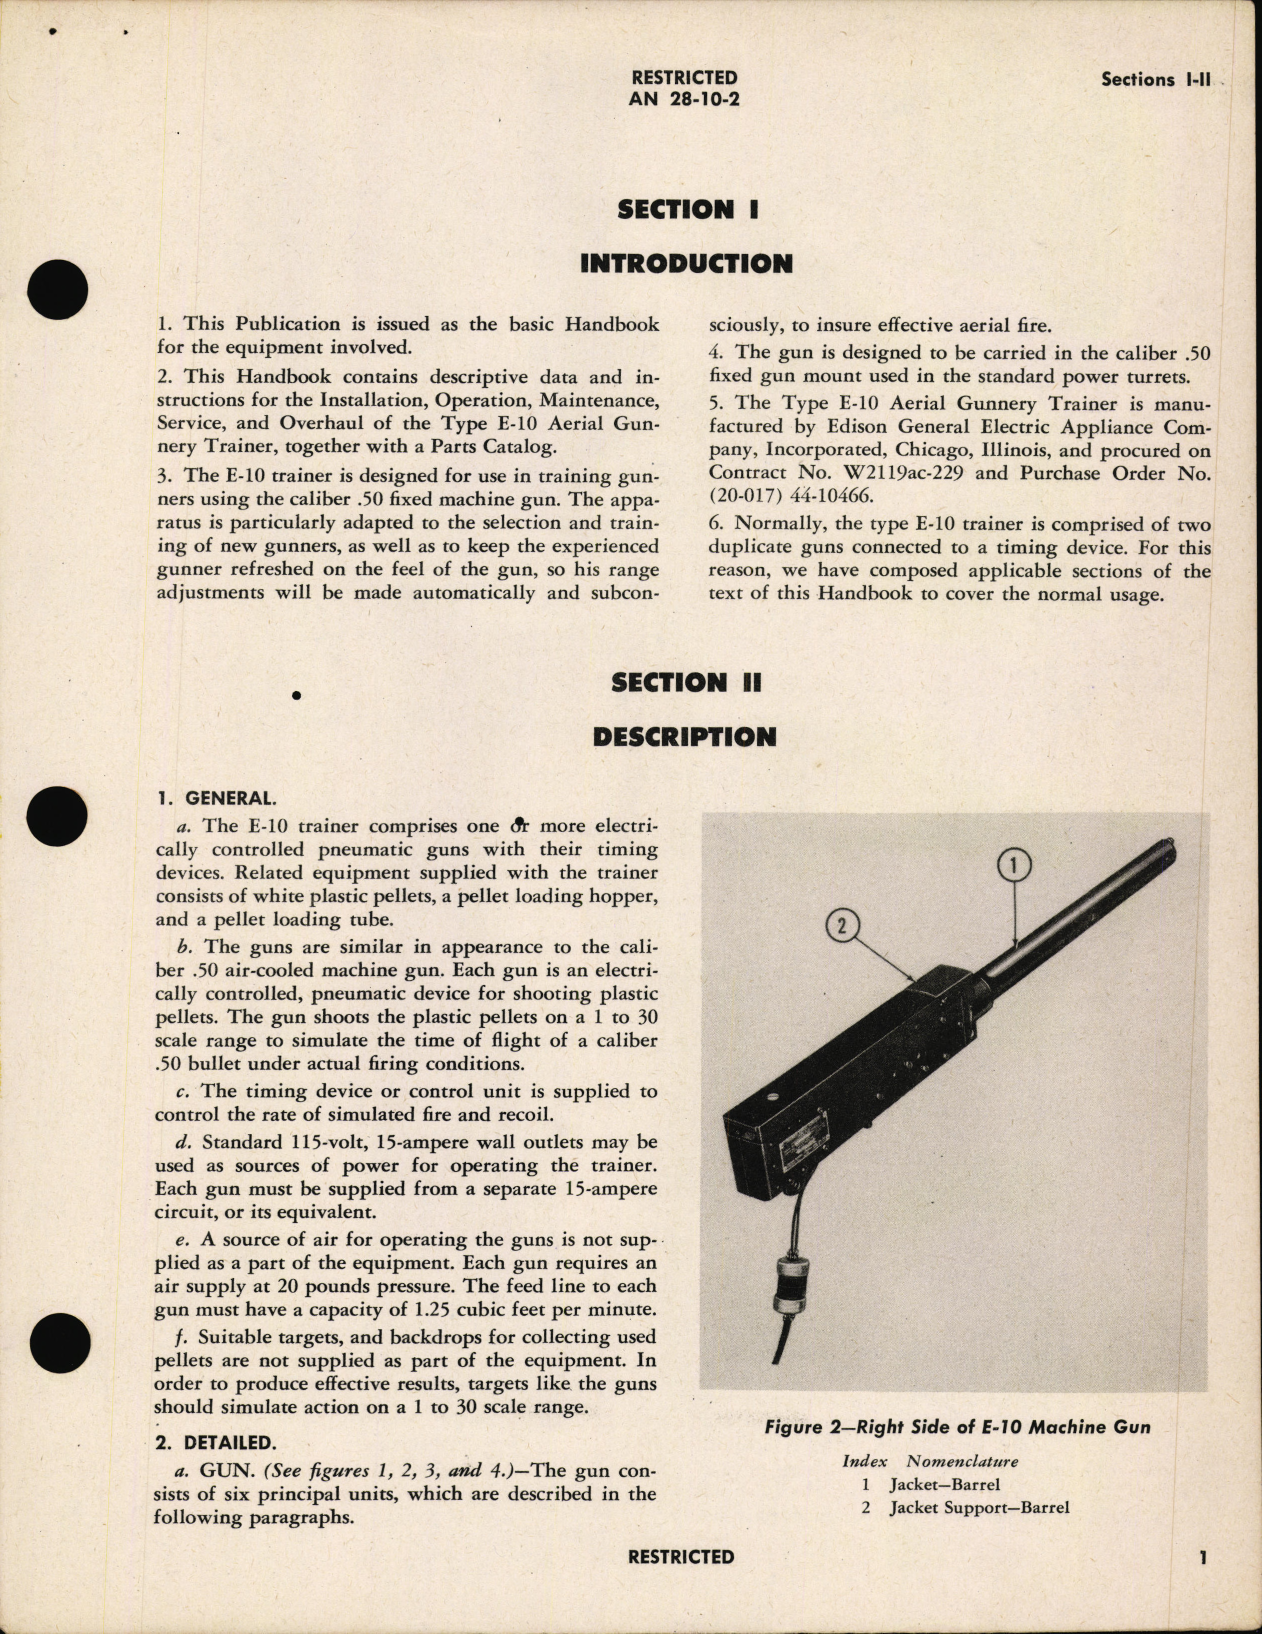 Sample page 5 from AirCorps Library document: Handbook of Instructions with Parts Catalog for Aerial Gunnery trainer Type E-10